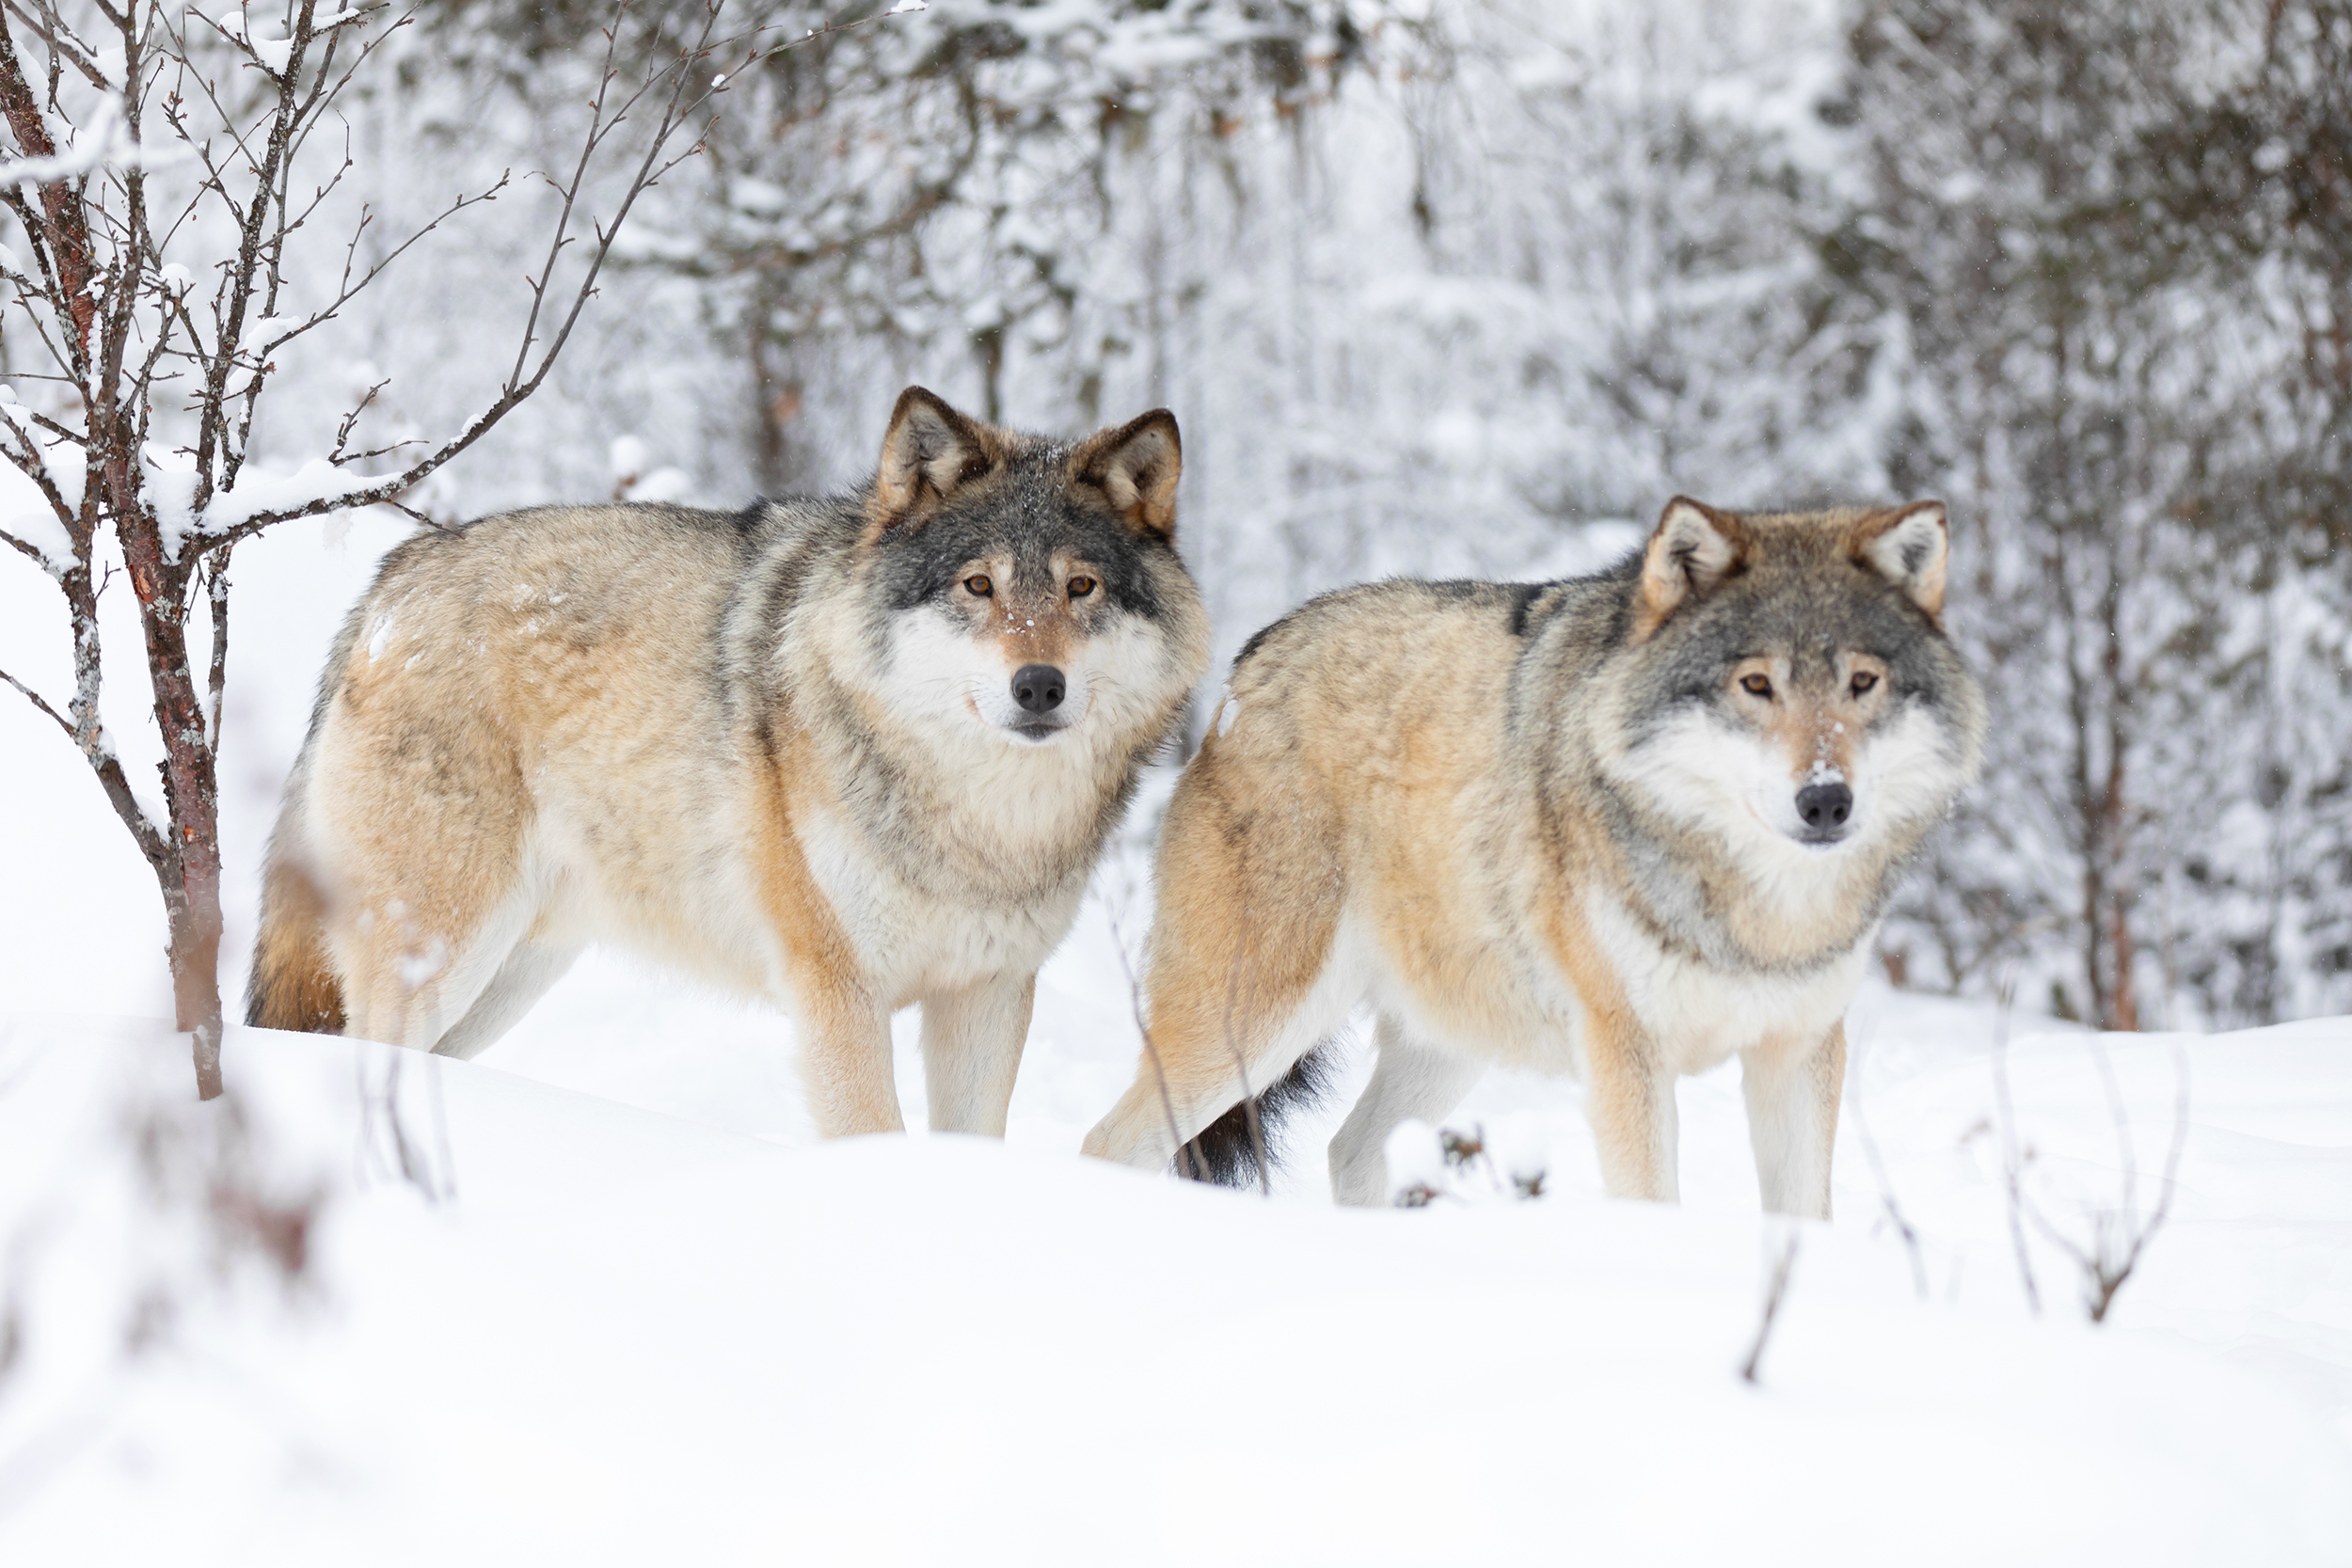 Two gray wolves (Canis lupus) in the woods a cold winter day. Image Credit: Kjekol, Envato Elements.